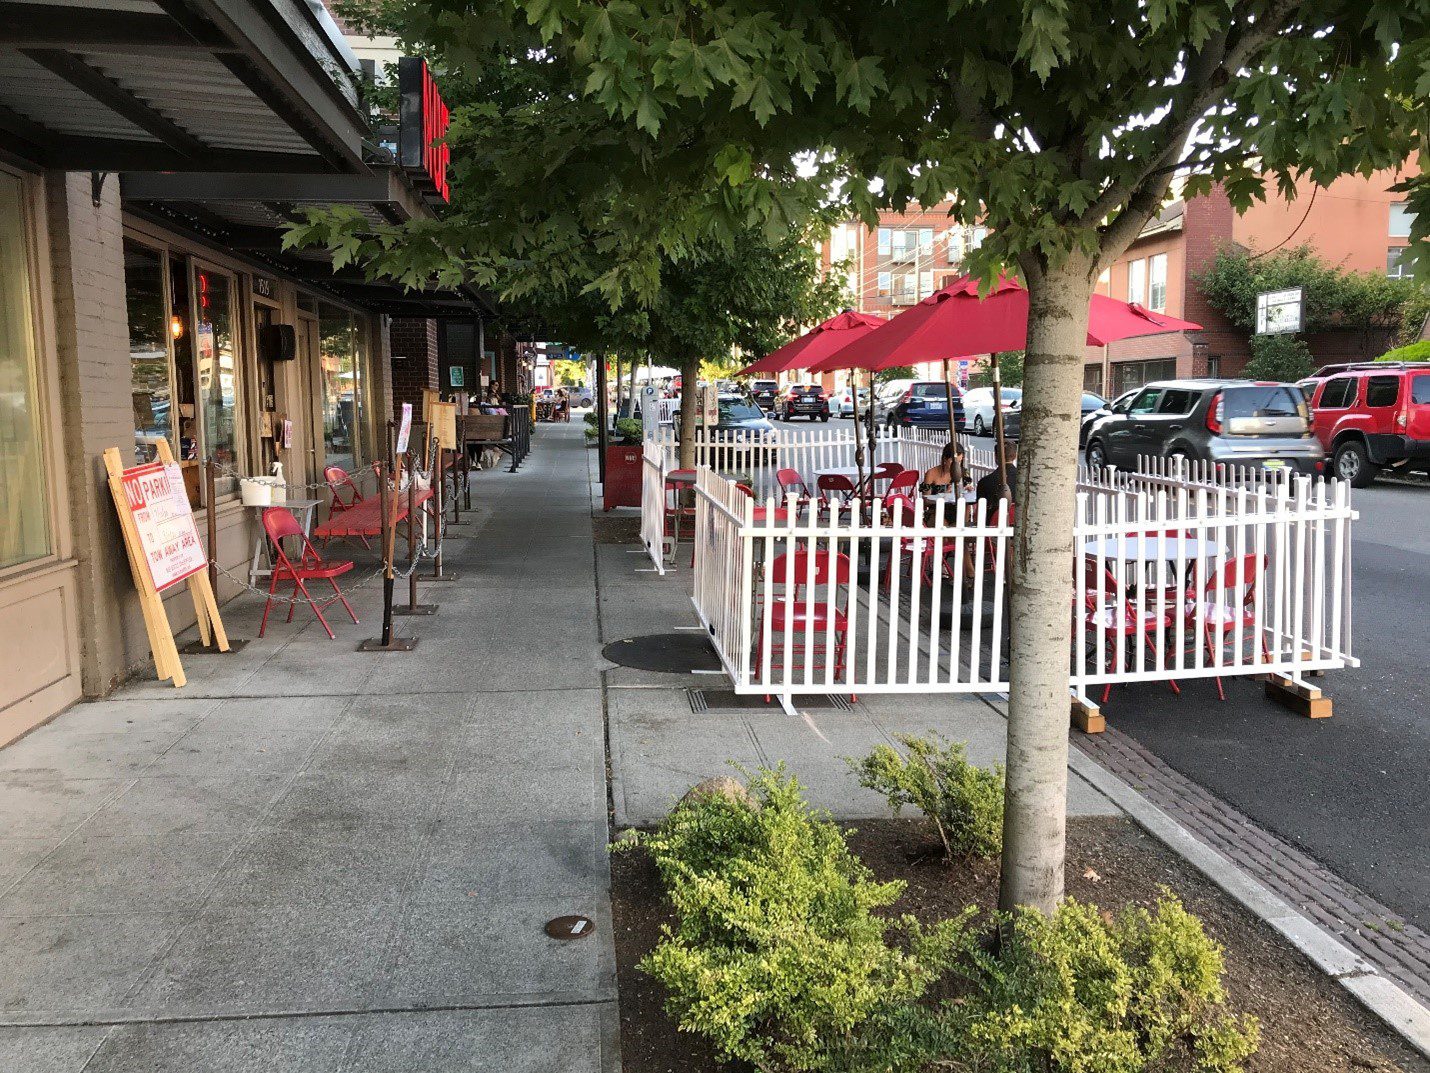 An outdoor dining area at NUE, a restaurant in Seattle's Capitol Hill neighborhood. A fenced eating area with red sun umbrellas is visible in the middle of the photo, with parked cars and buildings visible in the background.